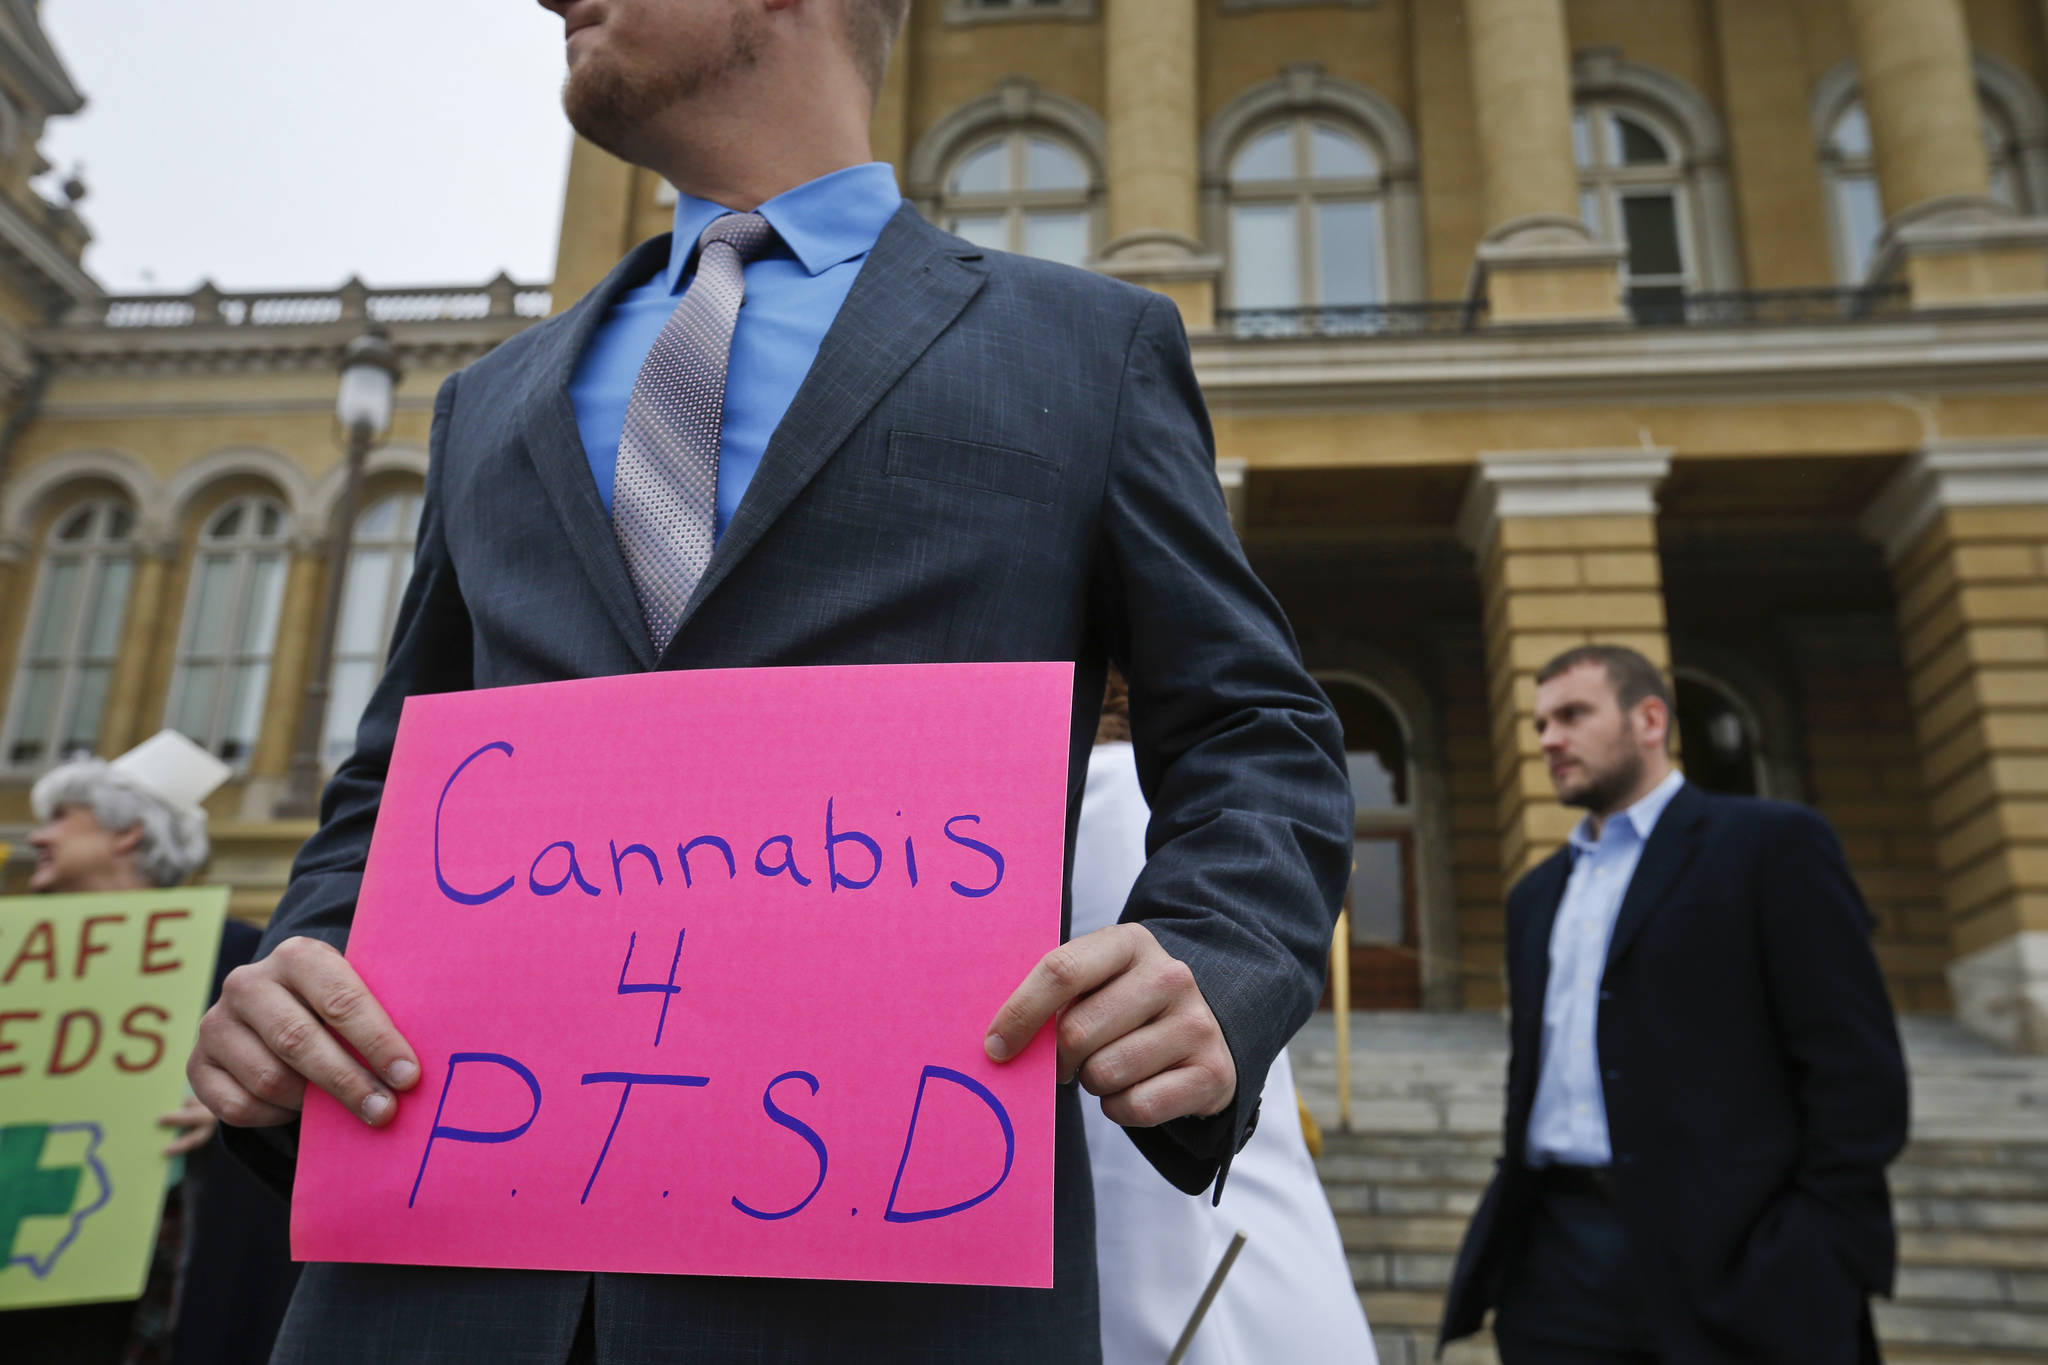 In this Tuesday, April 7, 2015 photo, a Marine veteran holds a sign to show support for cannabis for post traumatic stress disorder sufferers, outside the State Capitol in Des Moines, Iowa. Twenty-eight states plus the District of Columbia have enabled the use of marijuana to treat PTSD, and the number has doubled just in the last two years amid increasingly visible advocacy from veterans’ groups. (Michael Zamora | The Des Moines Register File)